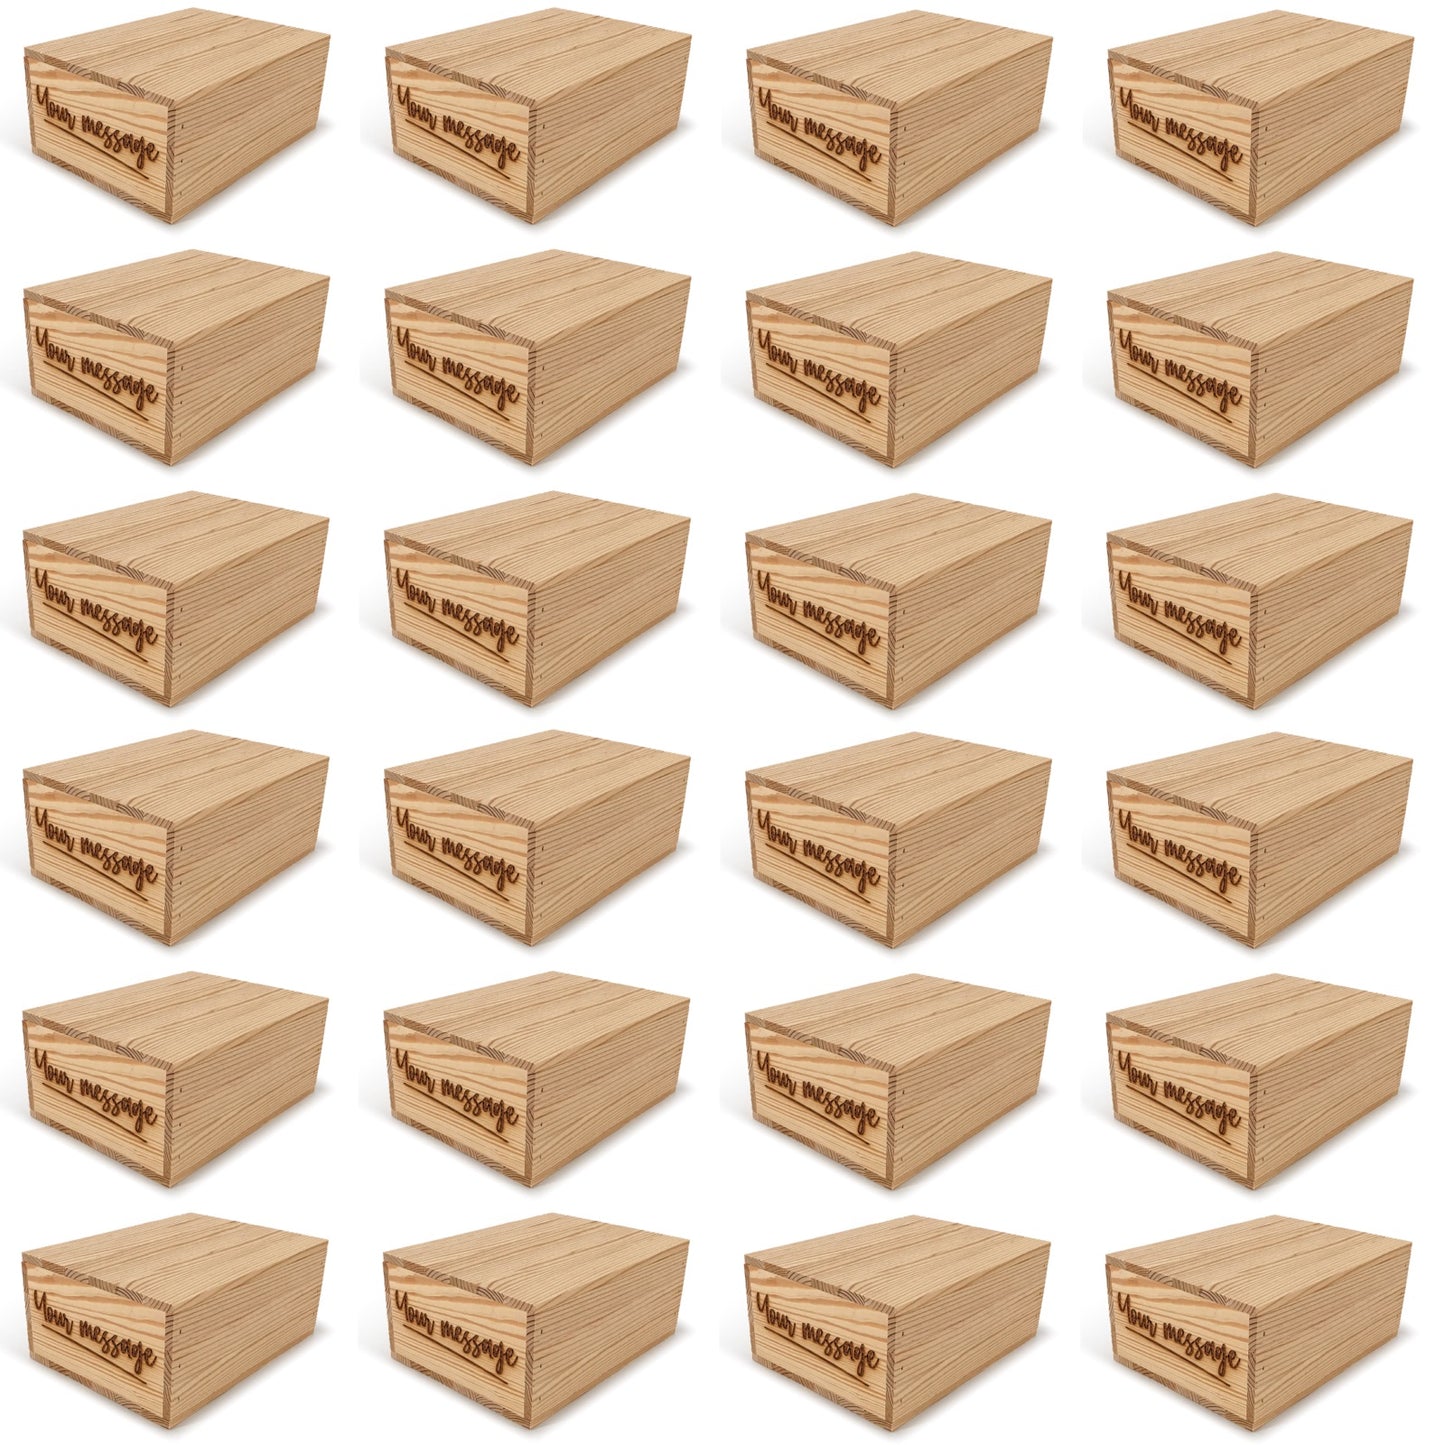 24 Small wooden crates with lid and custom message 10x8x4.25